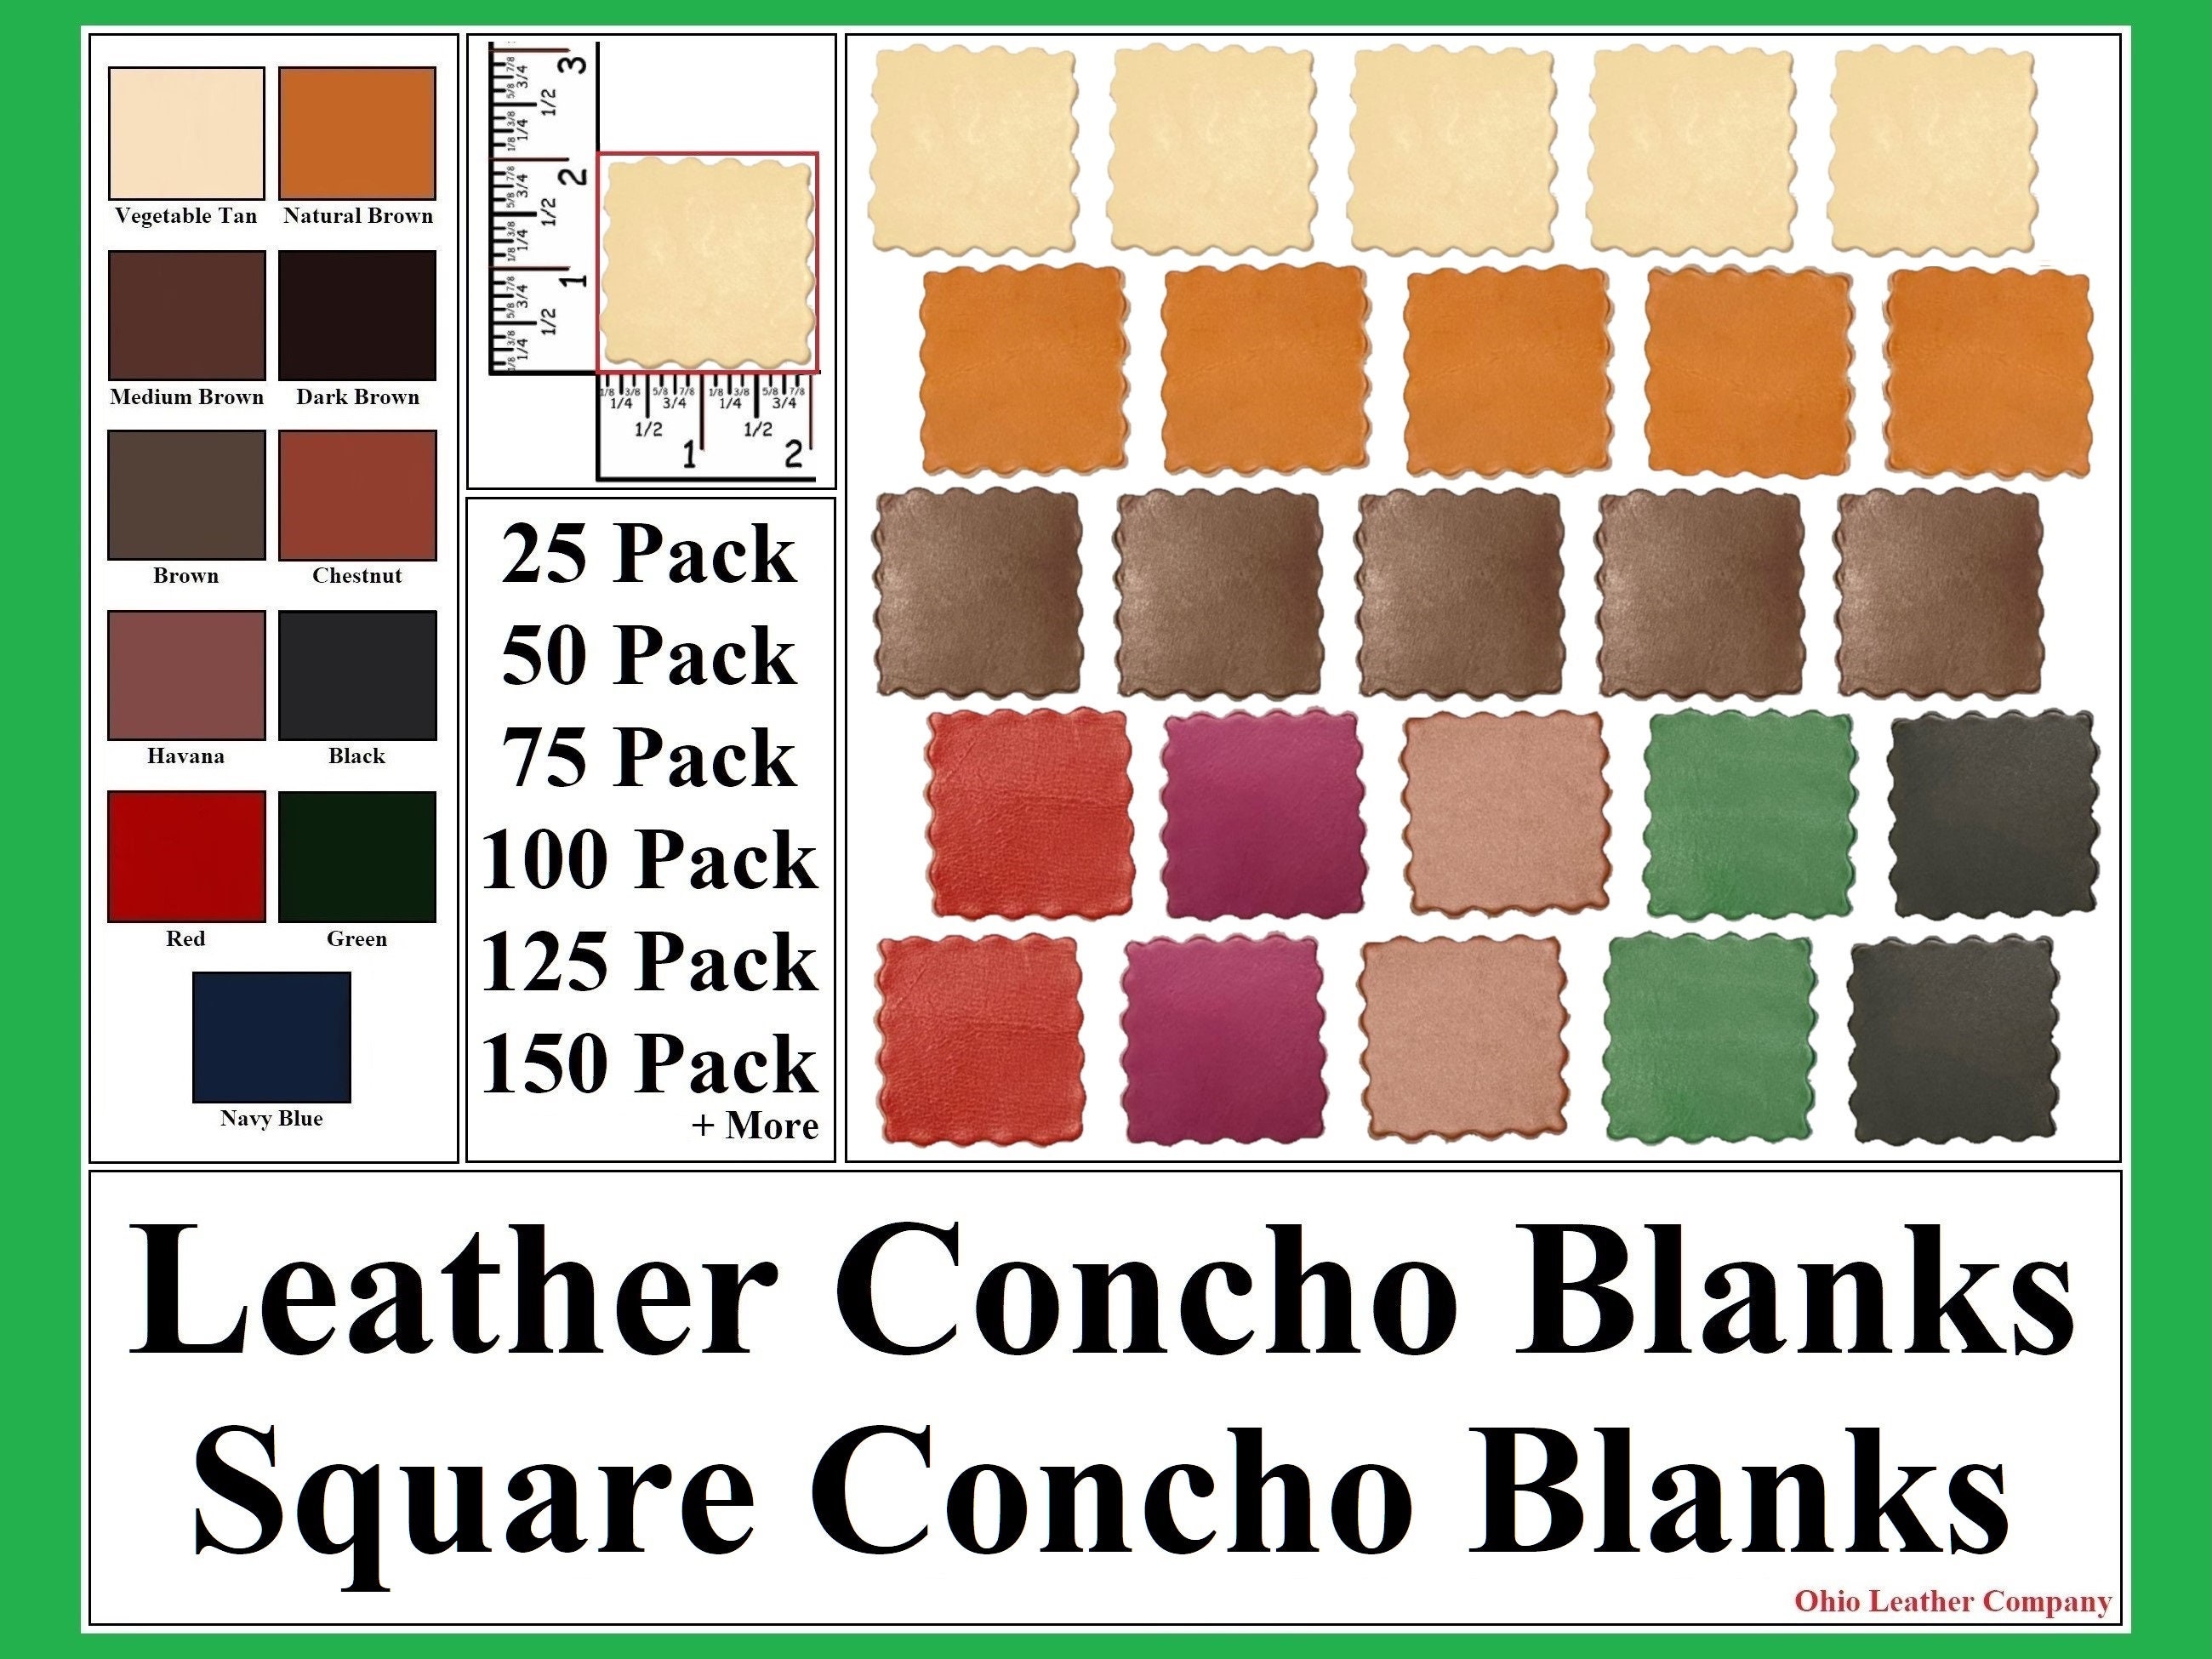 Leather Concho Blanks